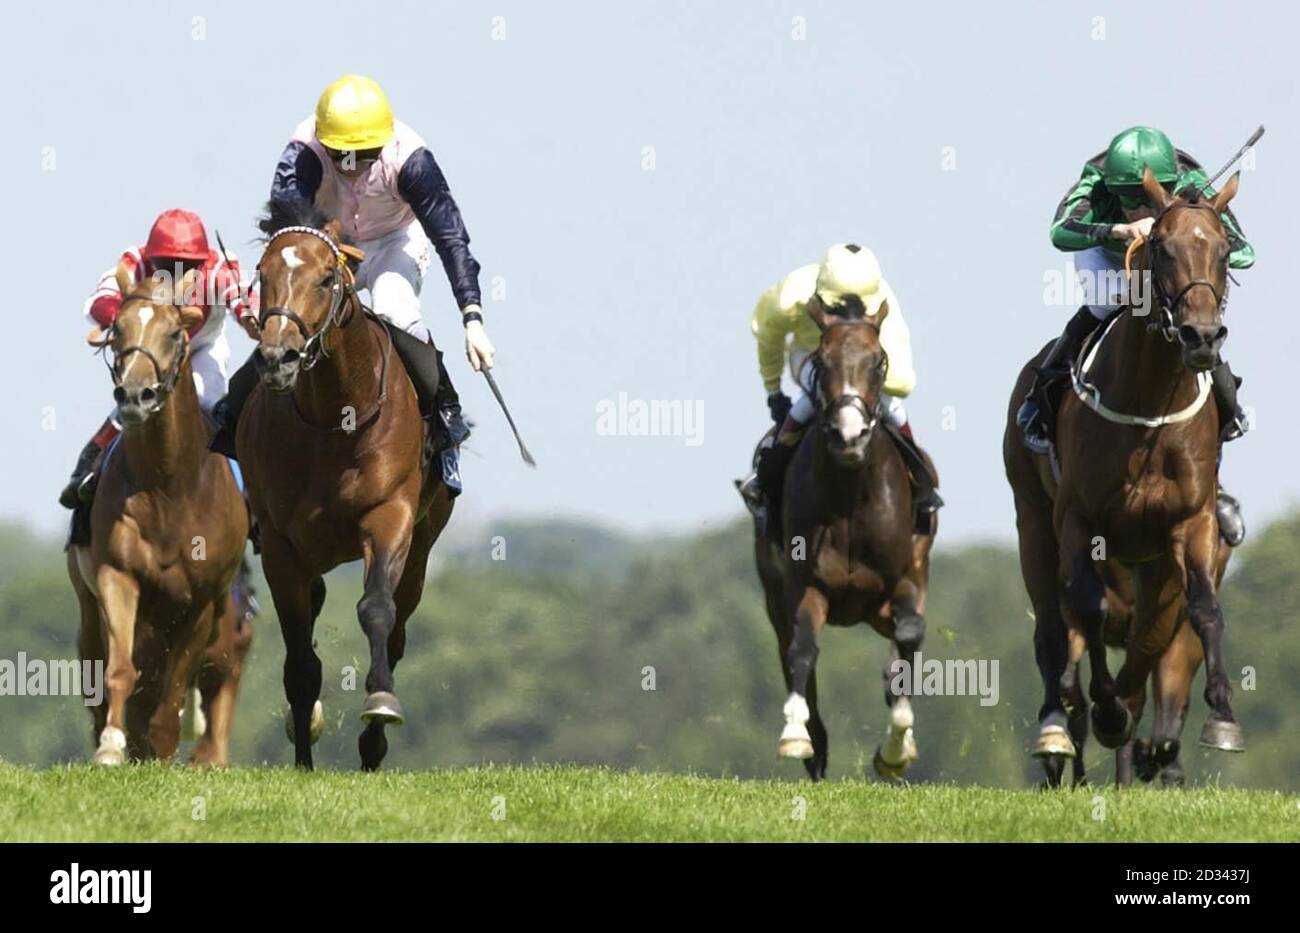 High Accolade ridden by Martin Dwyer (yellow hat) pips Kevin Dalgleish's mount Delsarte (far right) to the line, to win the King Edward VII Stakes at Royal Ascot. Stock Photo